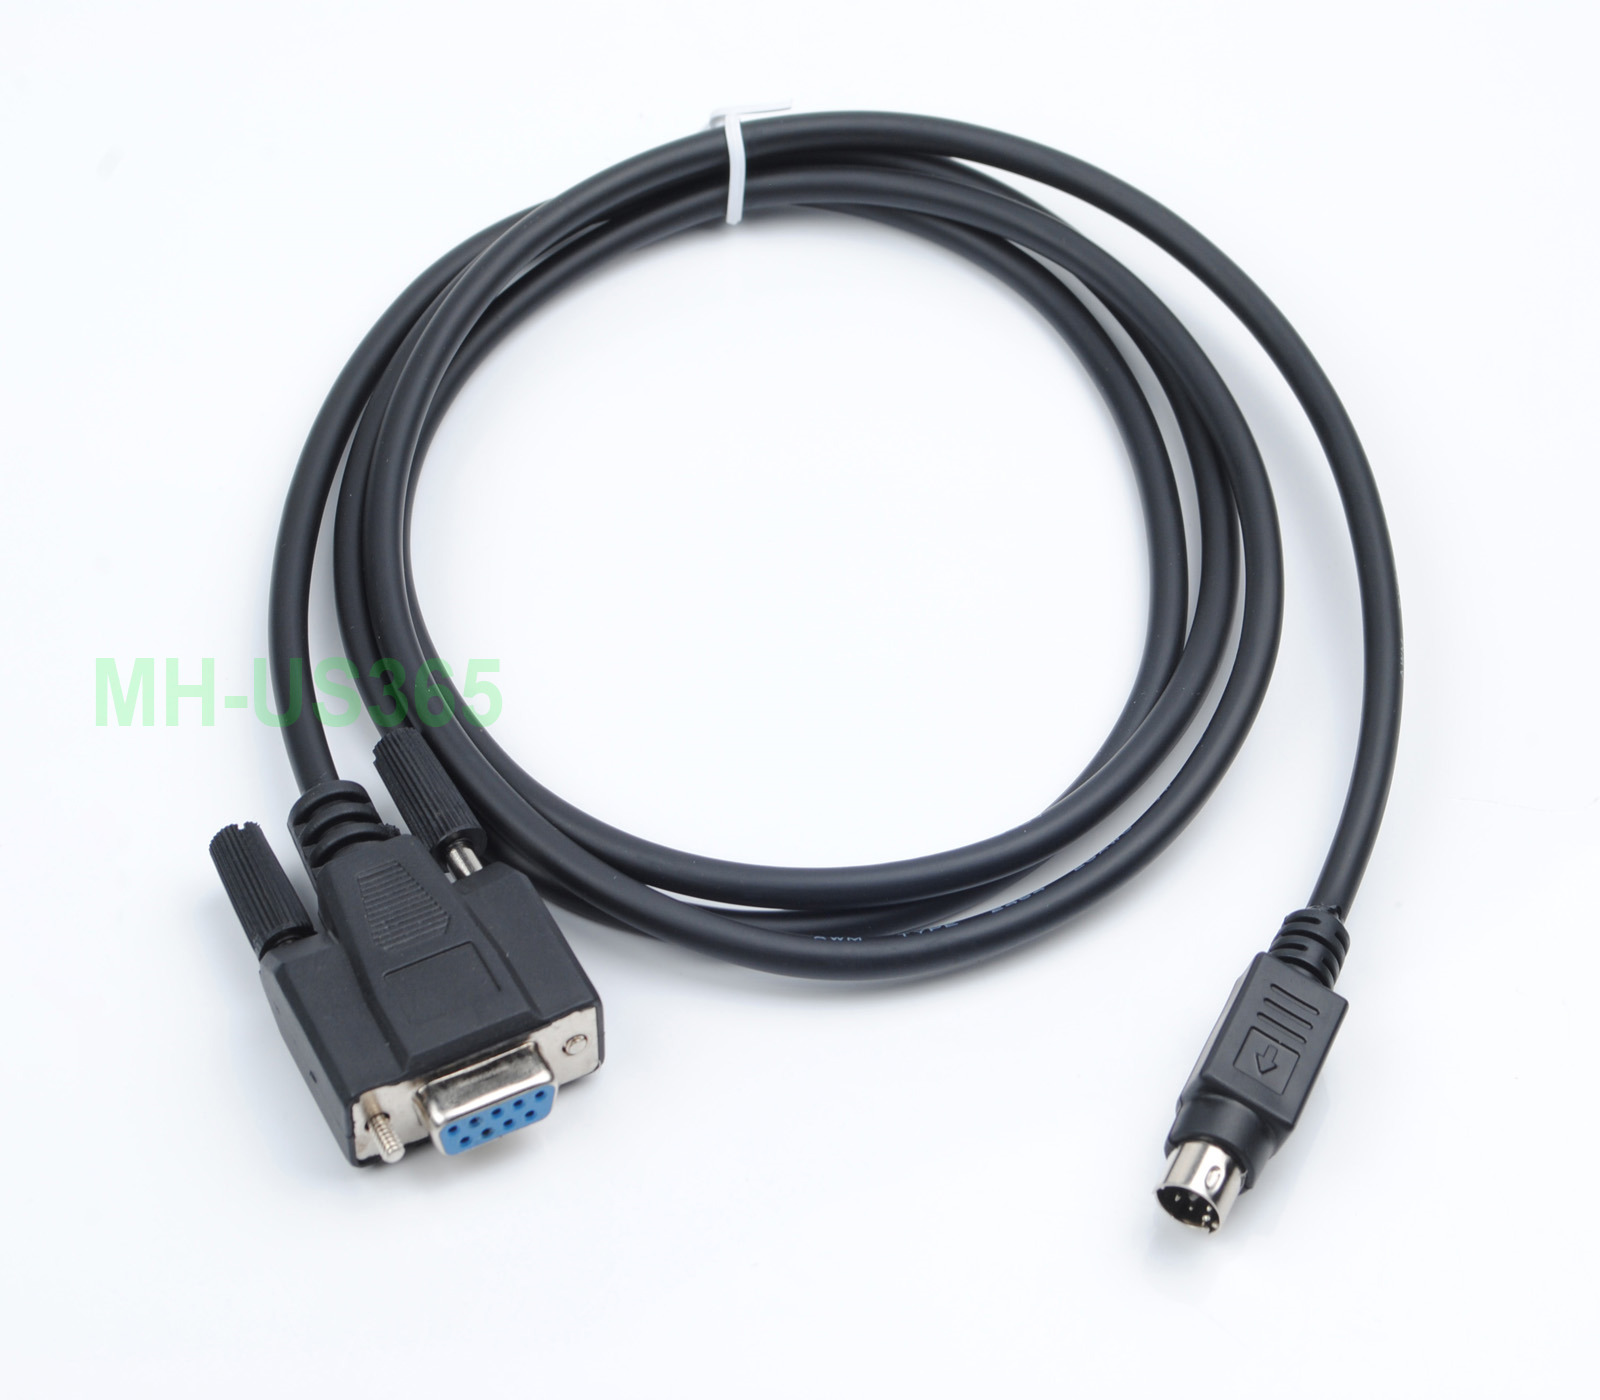 New Password Reset/Service Cable Fit for DELL MD1200 MD1220 MD3200 MN657